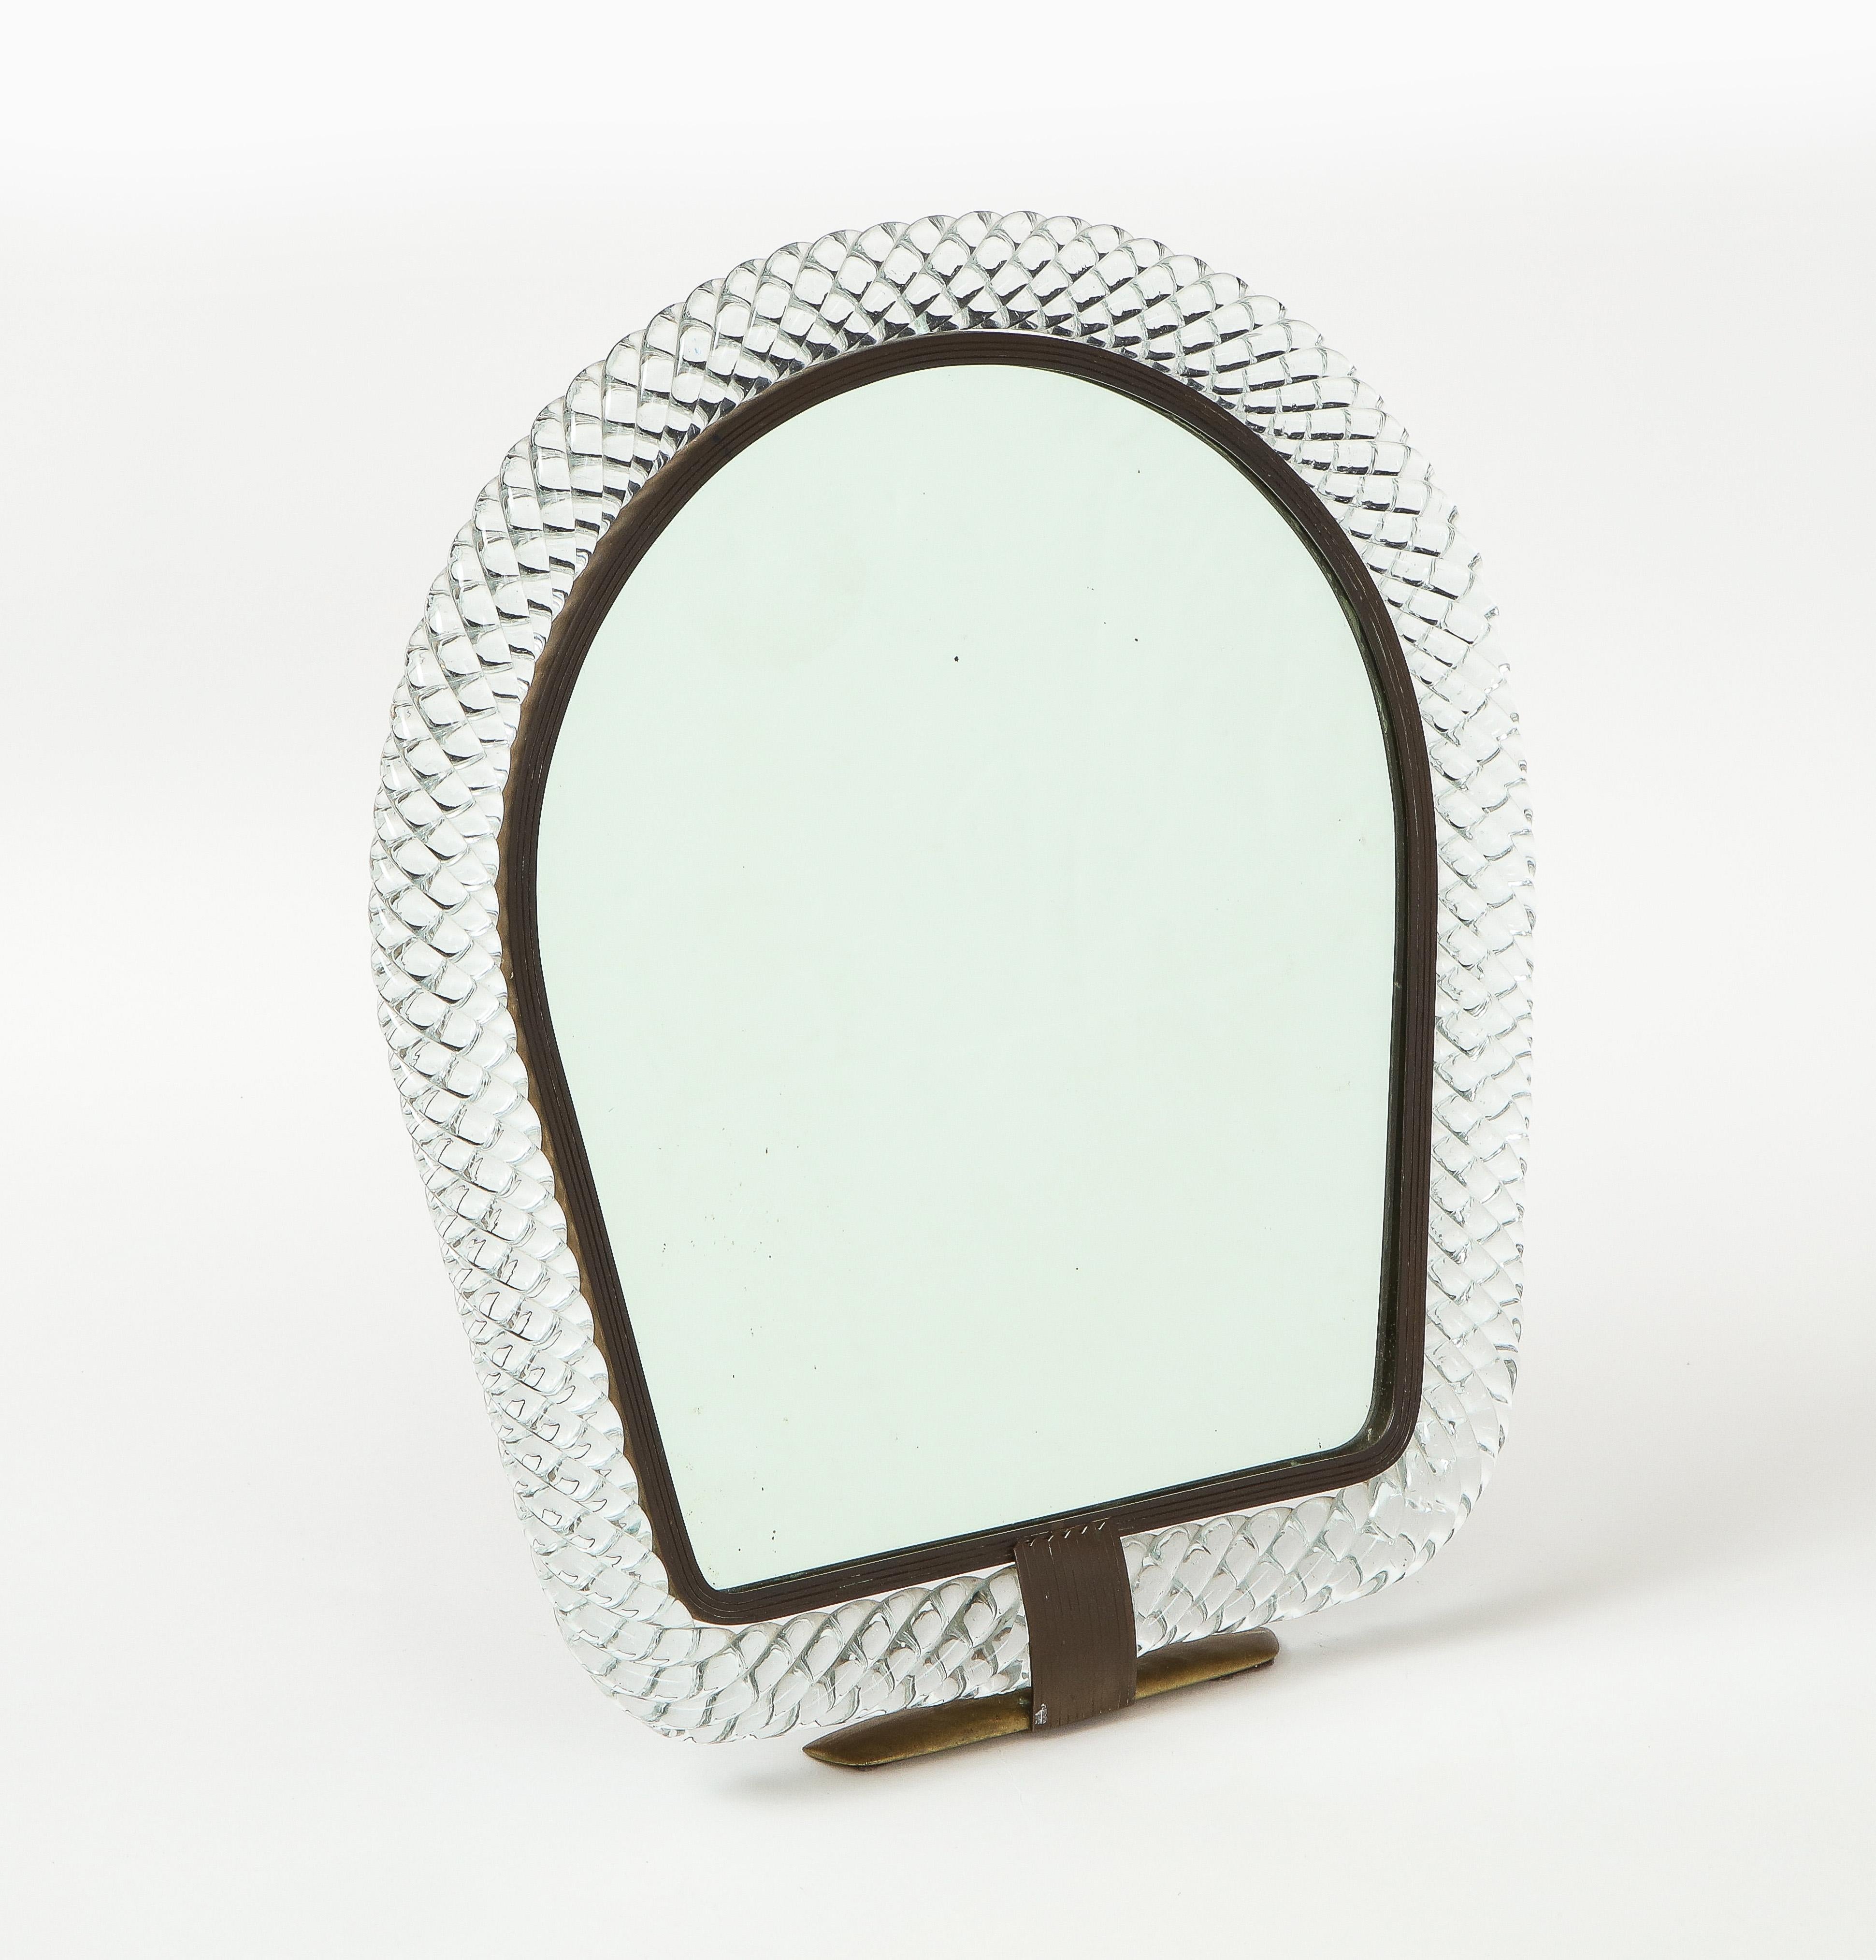 Rare exquisite Carlo Scarpa for Venini table or vanity mirror composed of arched top with braided clear blown glass with brass inner frame and mounts, original mirrored glass and wood backing, Italy, 1930s. This vanity or dressing mirror was made